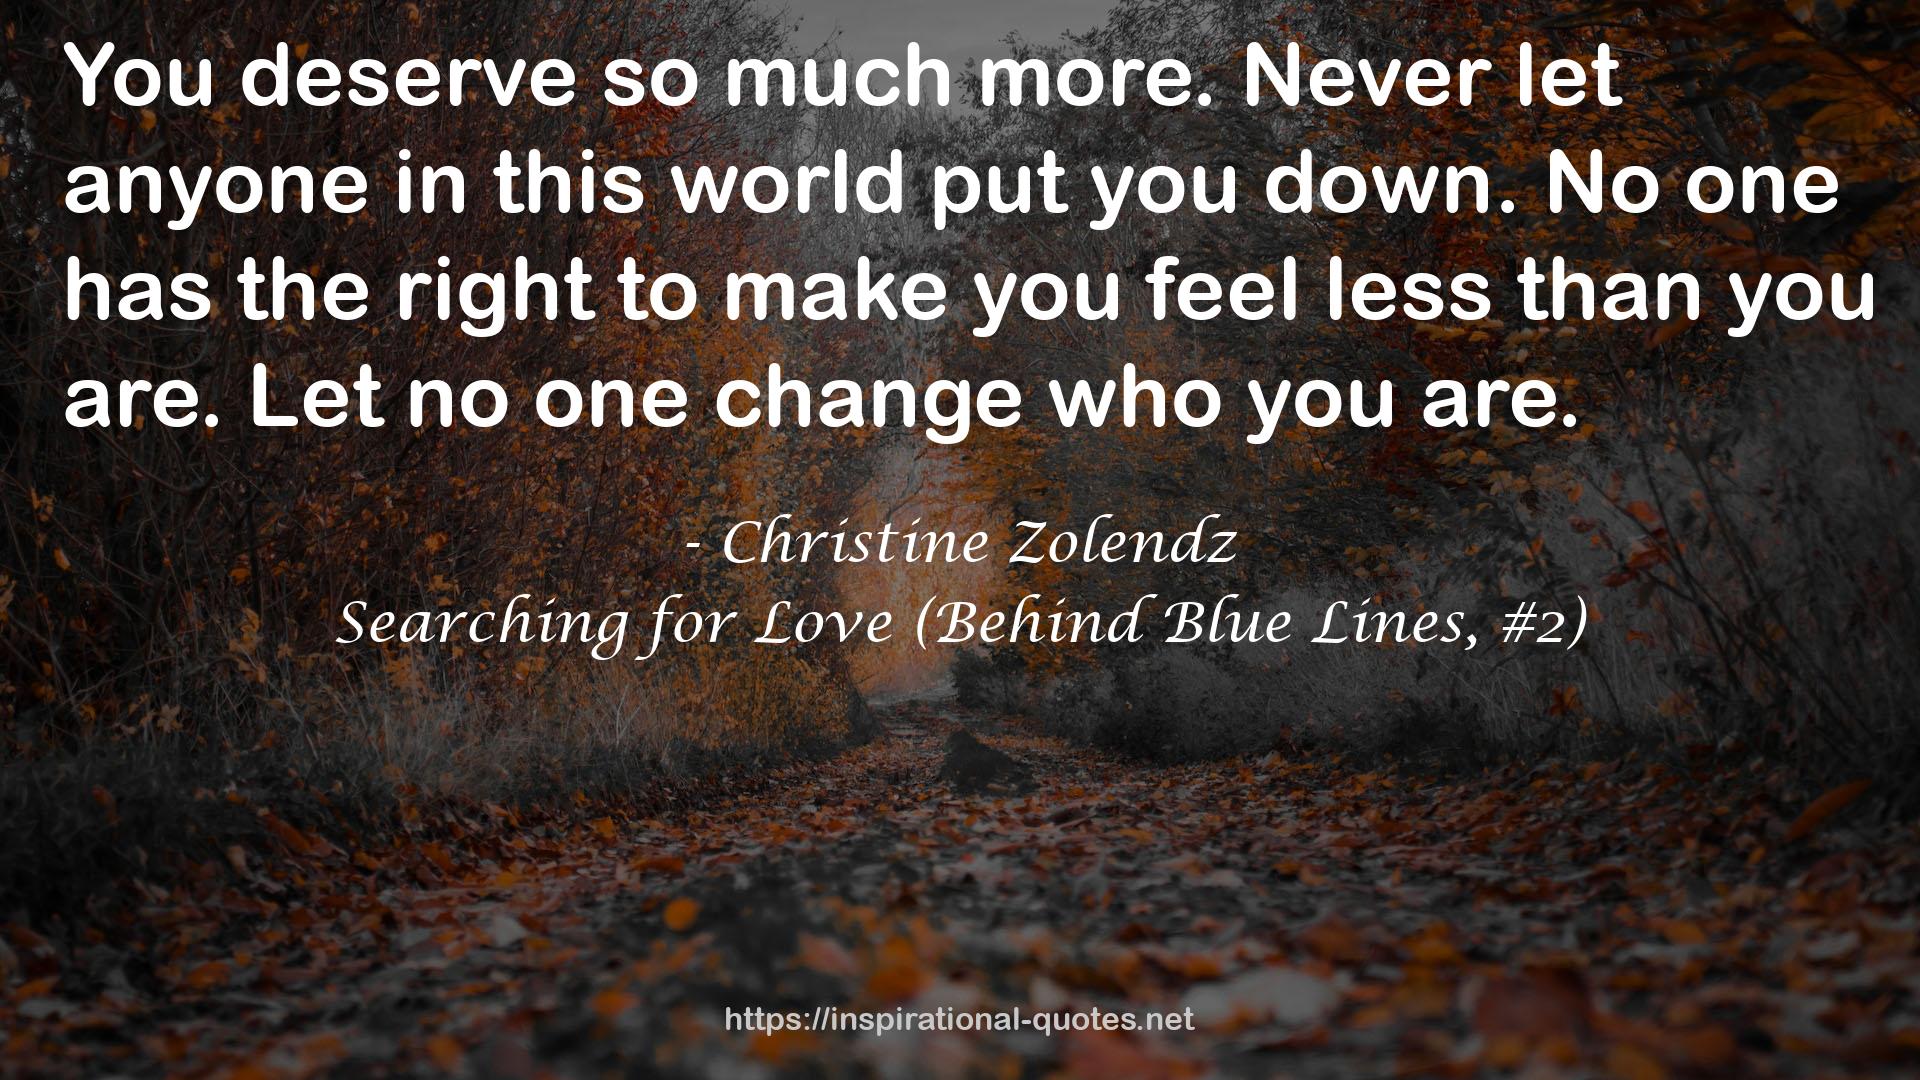 Searching for Love (Behind Blue Lines, #2) QUOTES